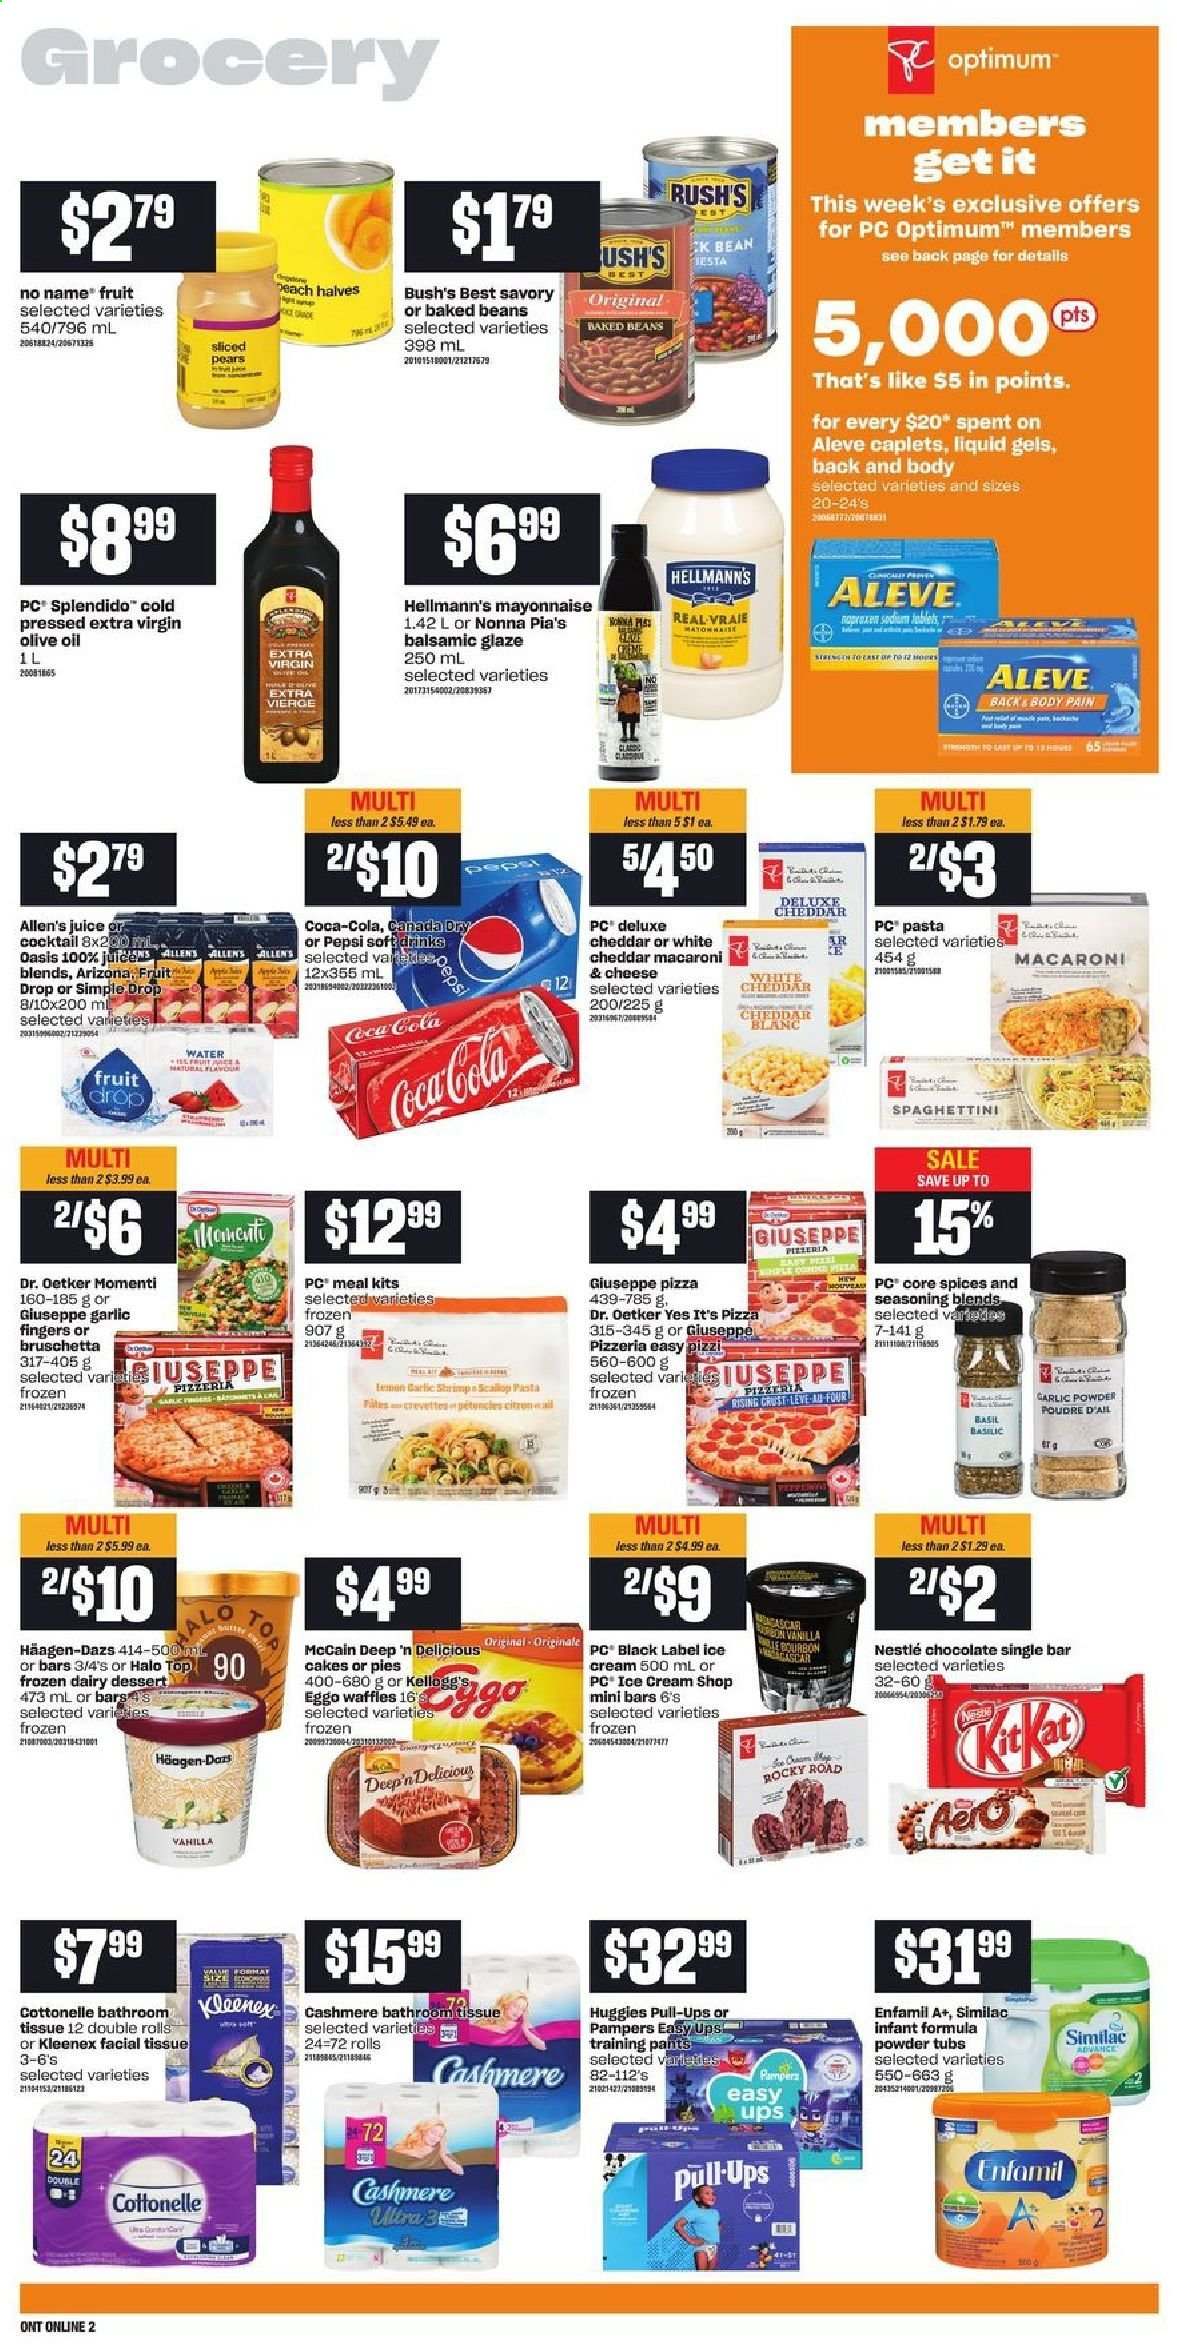 thumbnail - Loblaws Flyer - April 15, 2021 - April 21, 2021 - Sales products - cake, waffles, beans, garlic, pears, scallops, No Name, macaroni & cheese, pizza, pasta, bruschetta, Dr. Oetker, mayonnaise, Hellmann’s, ice cream, Häagen-Dazs, McCain, Kellogg's, baked beans, esponja, spice, balsamic glaze, extra virgin olive oil, olive oil, oil, Canada Dry, Coca-Cola, Pepsi, juice, soft drink, AriZona, Enfamil, Similac, pants, baby pants, bath tissue, Cottonelle, Kleenex, Optimum, Aleve, Nestlé, Huggies, Pampers. Page 6.